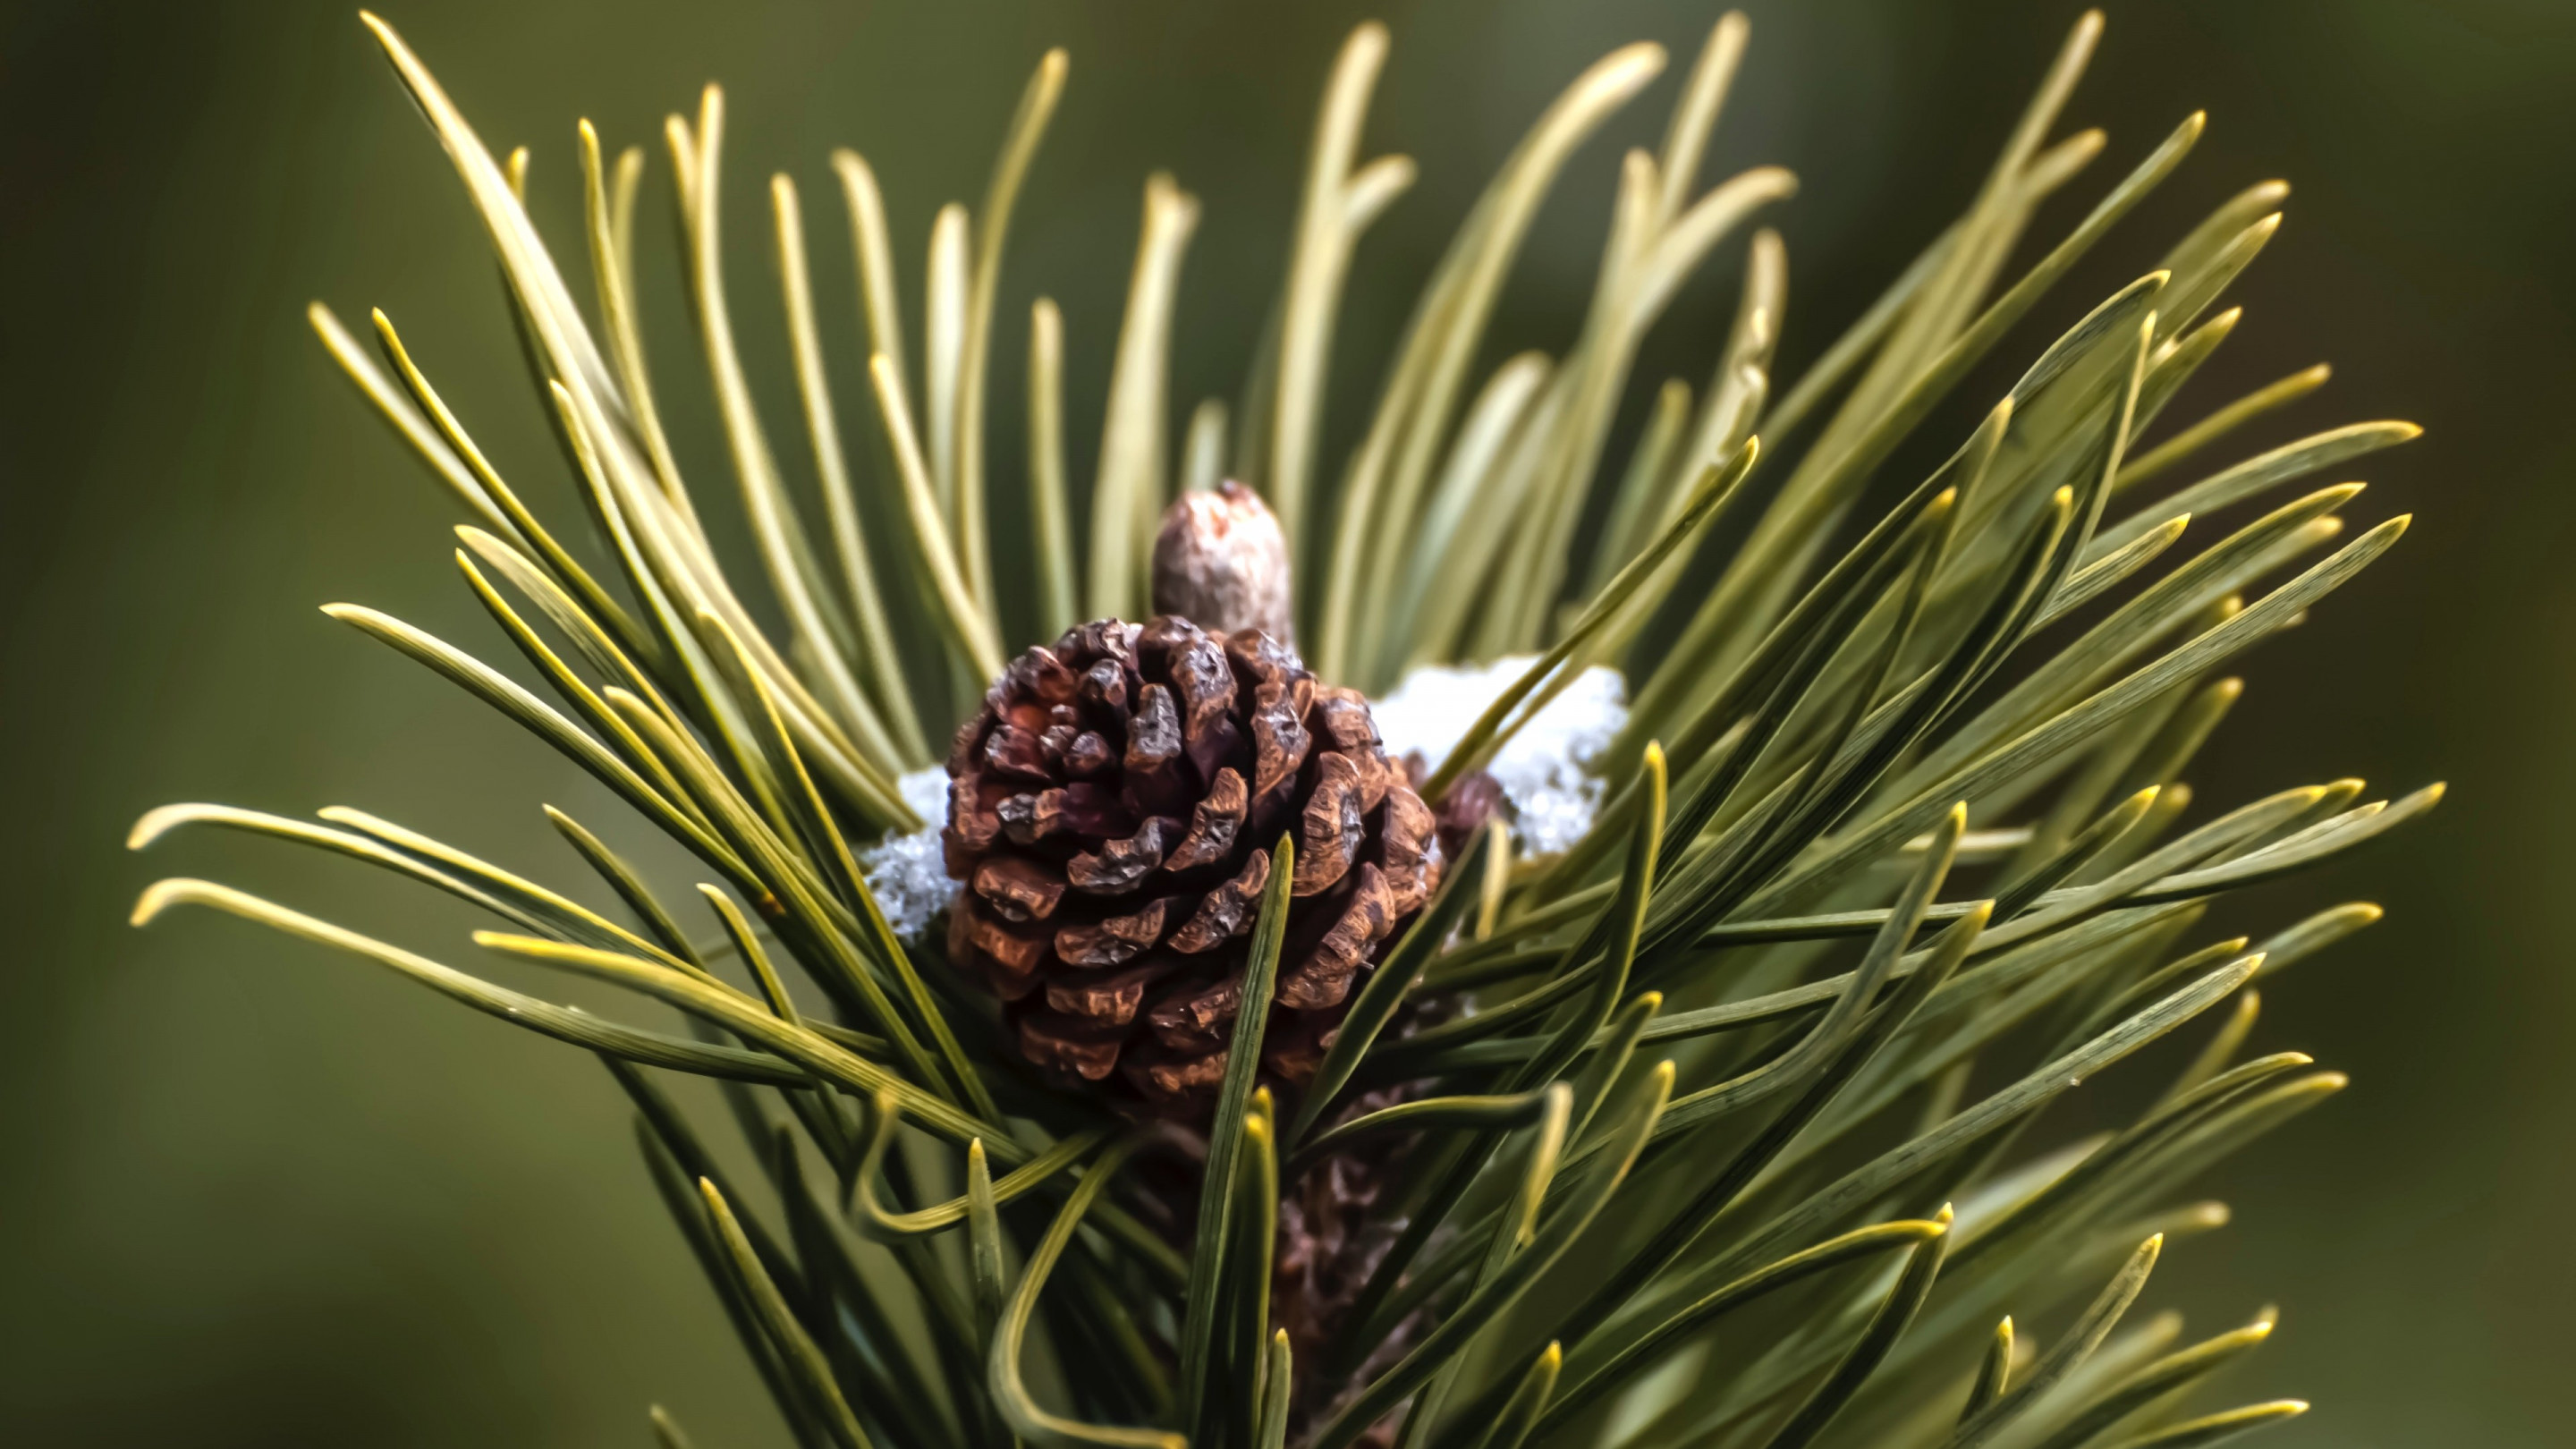 Cone and pine needles wallpaper 2880x1620